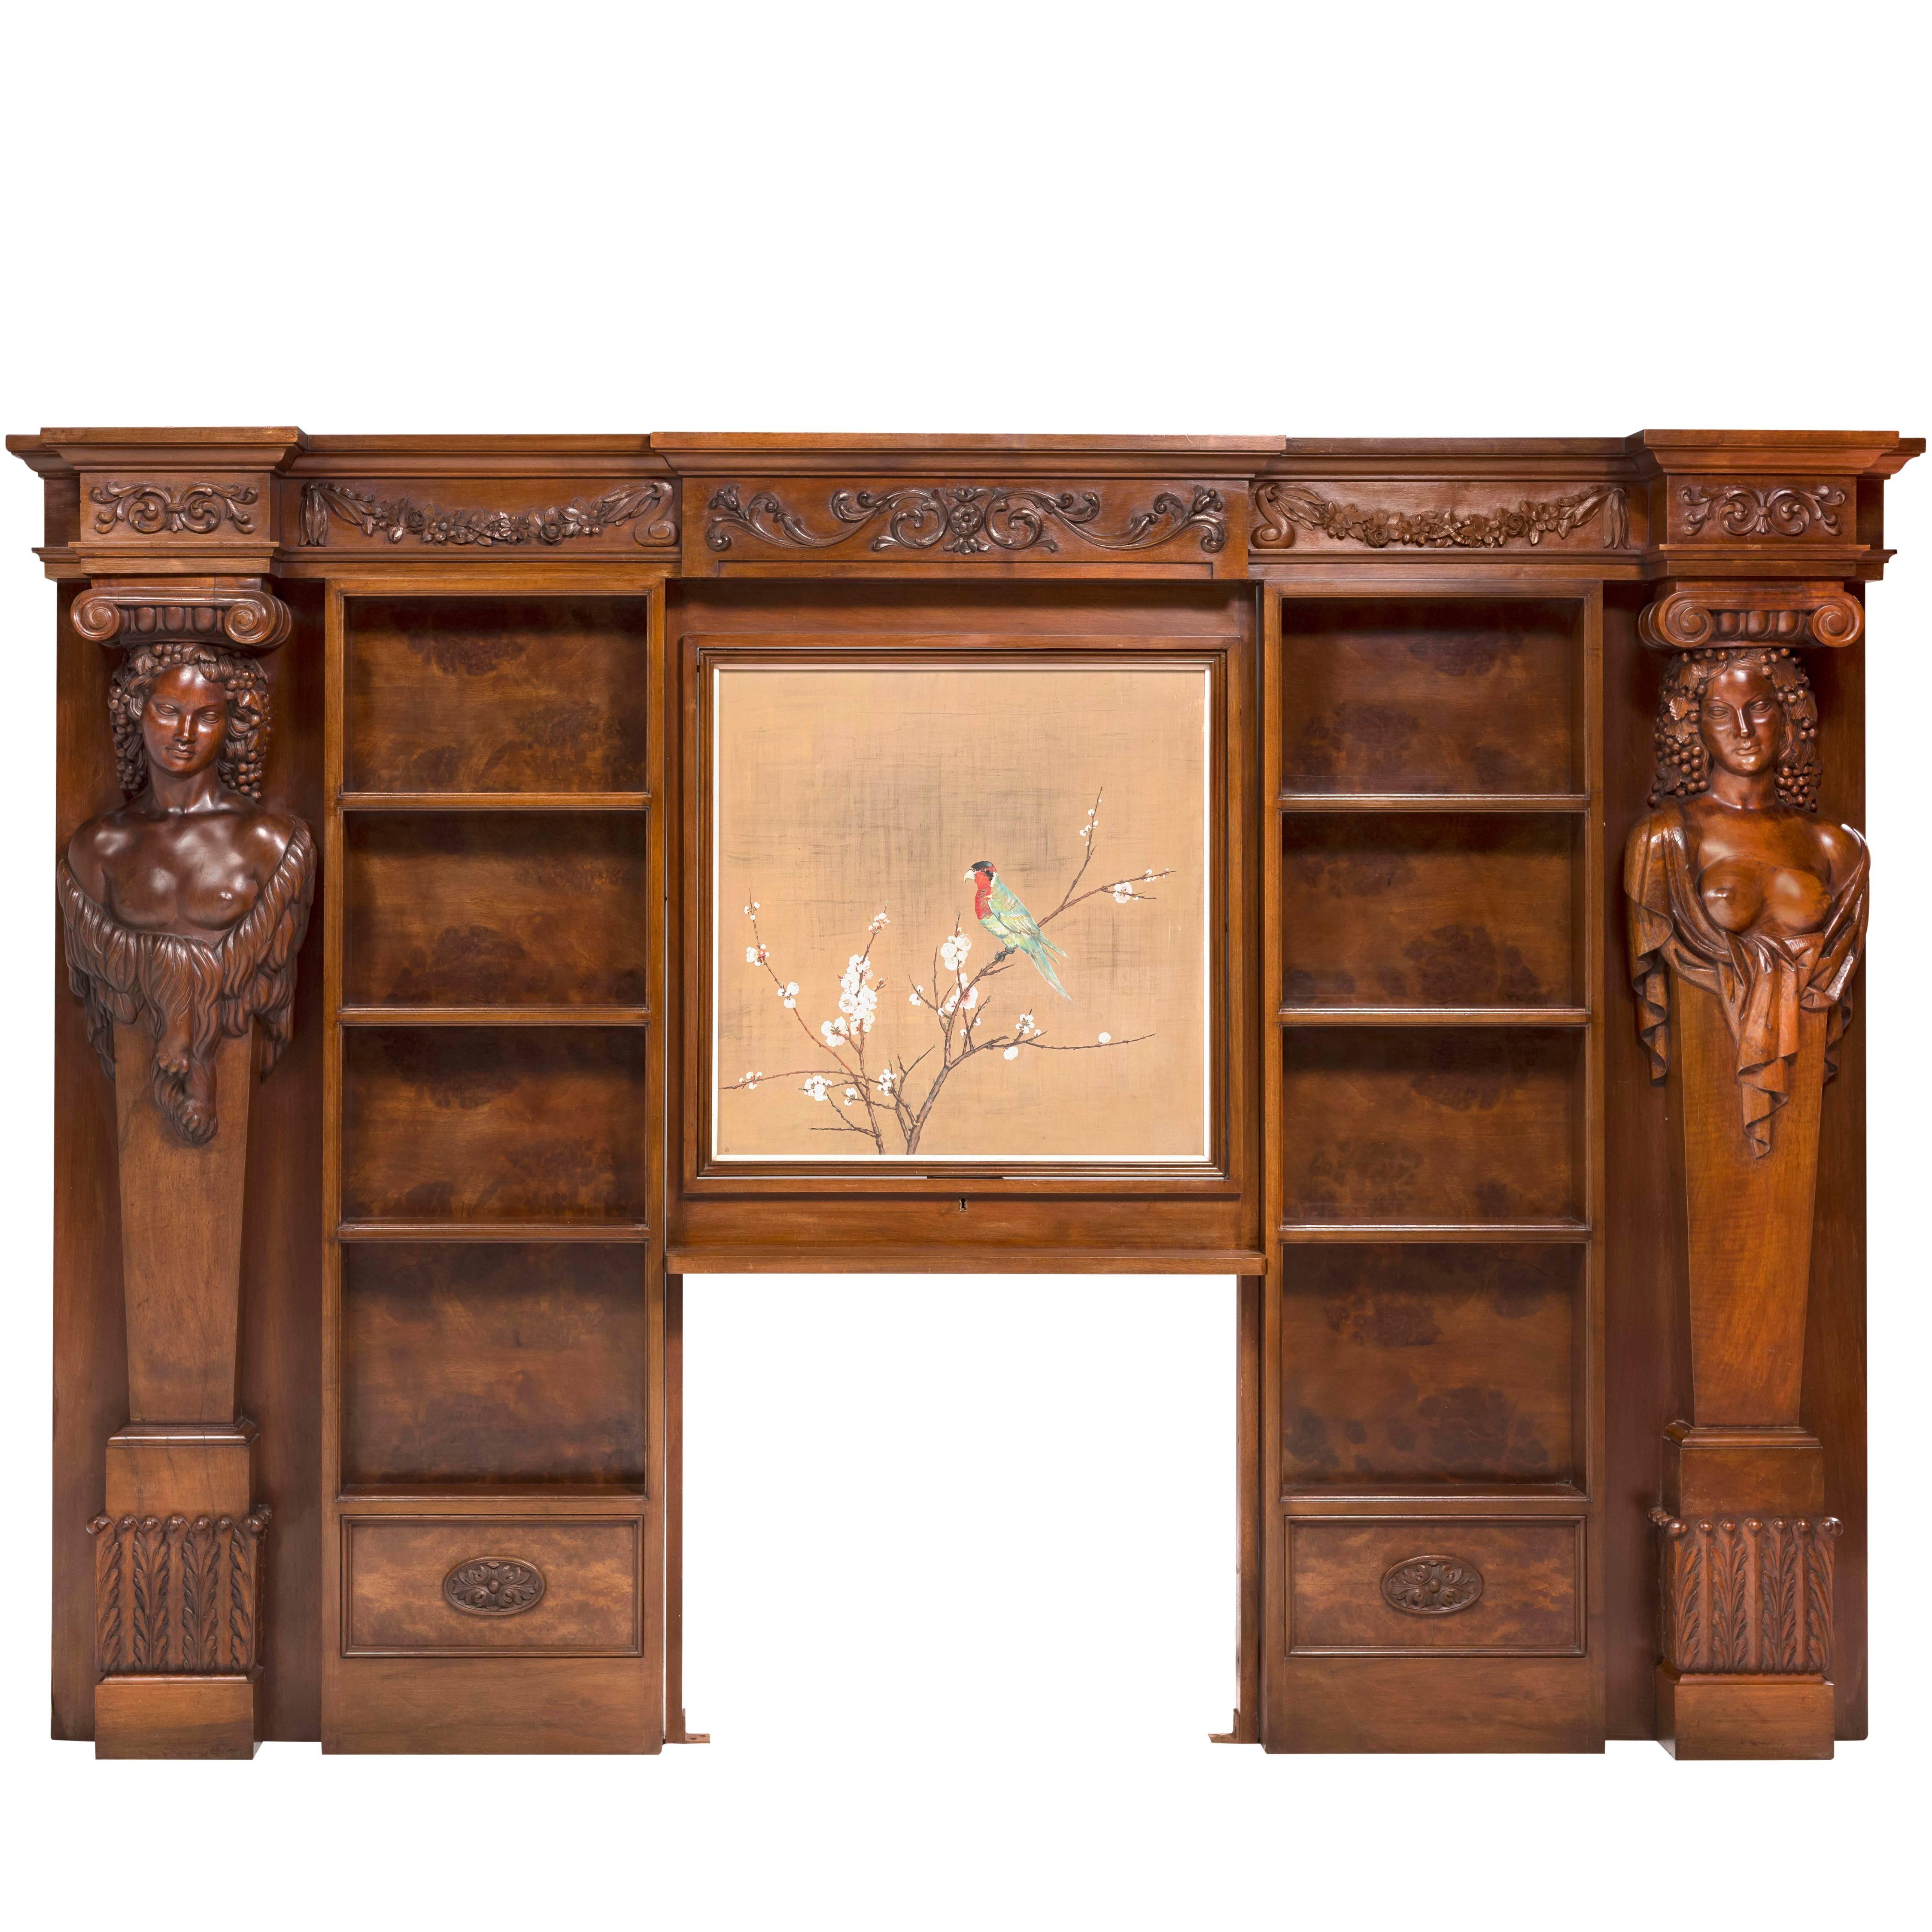 Woodwork, Headboard or Fireplace Forming Library, Surrounded by Caryatids